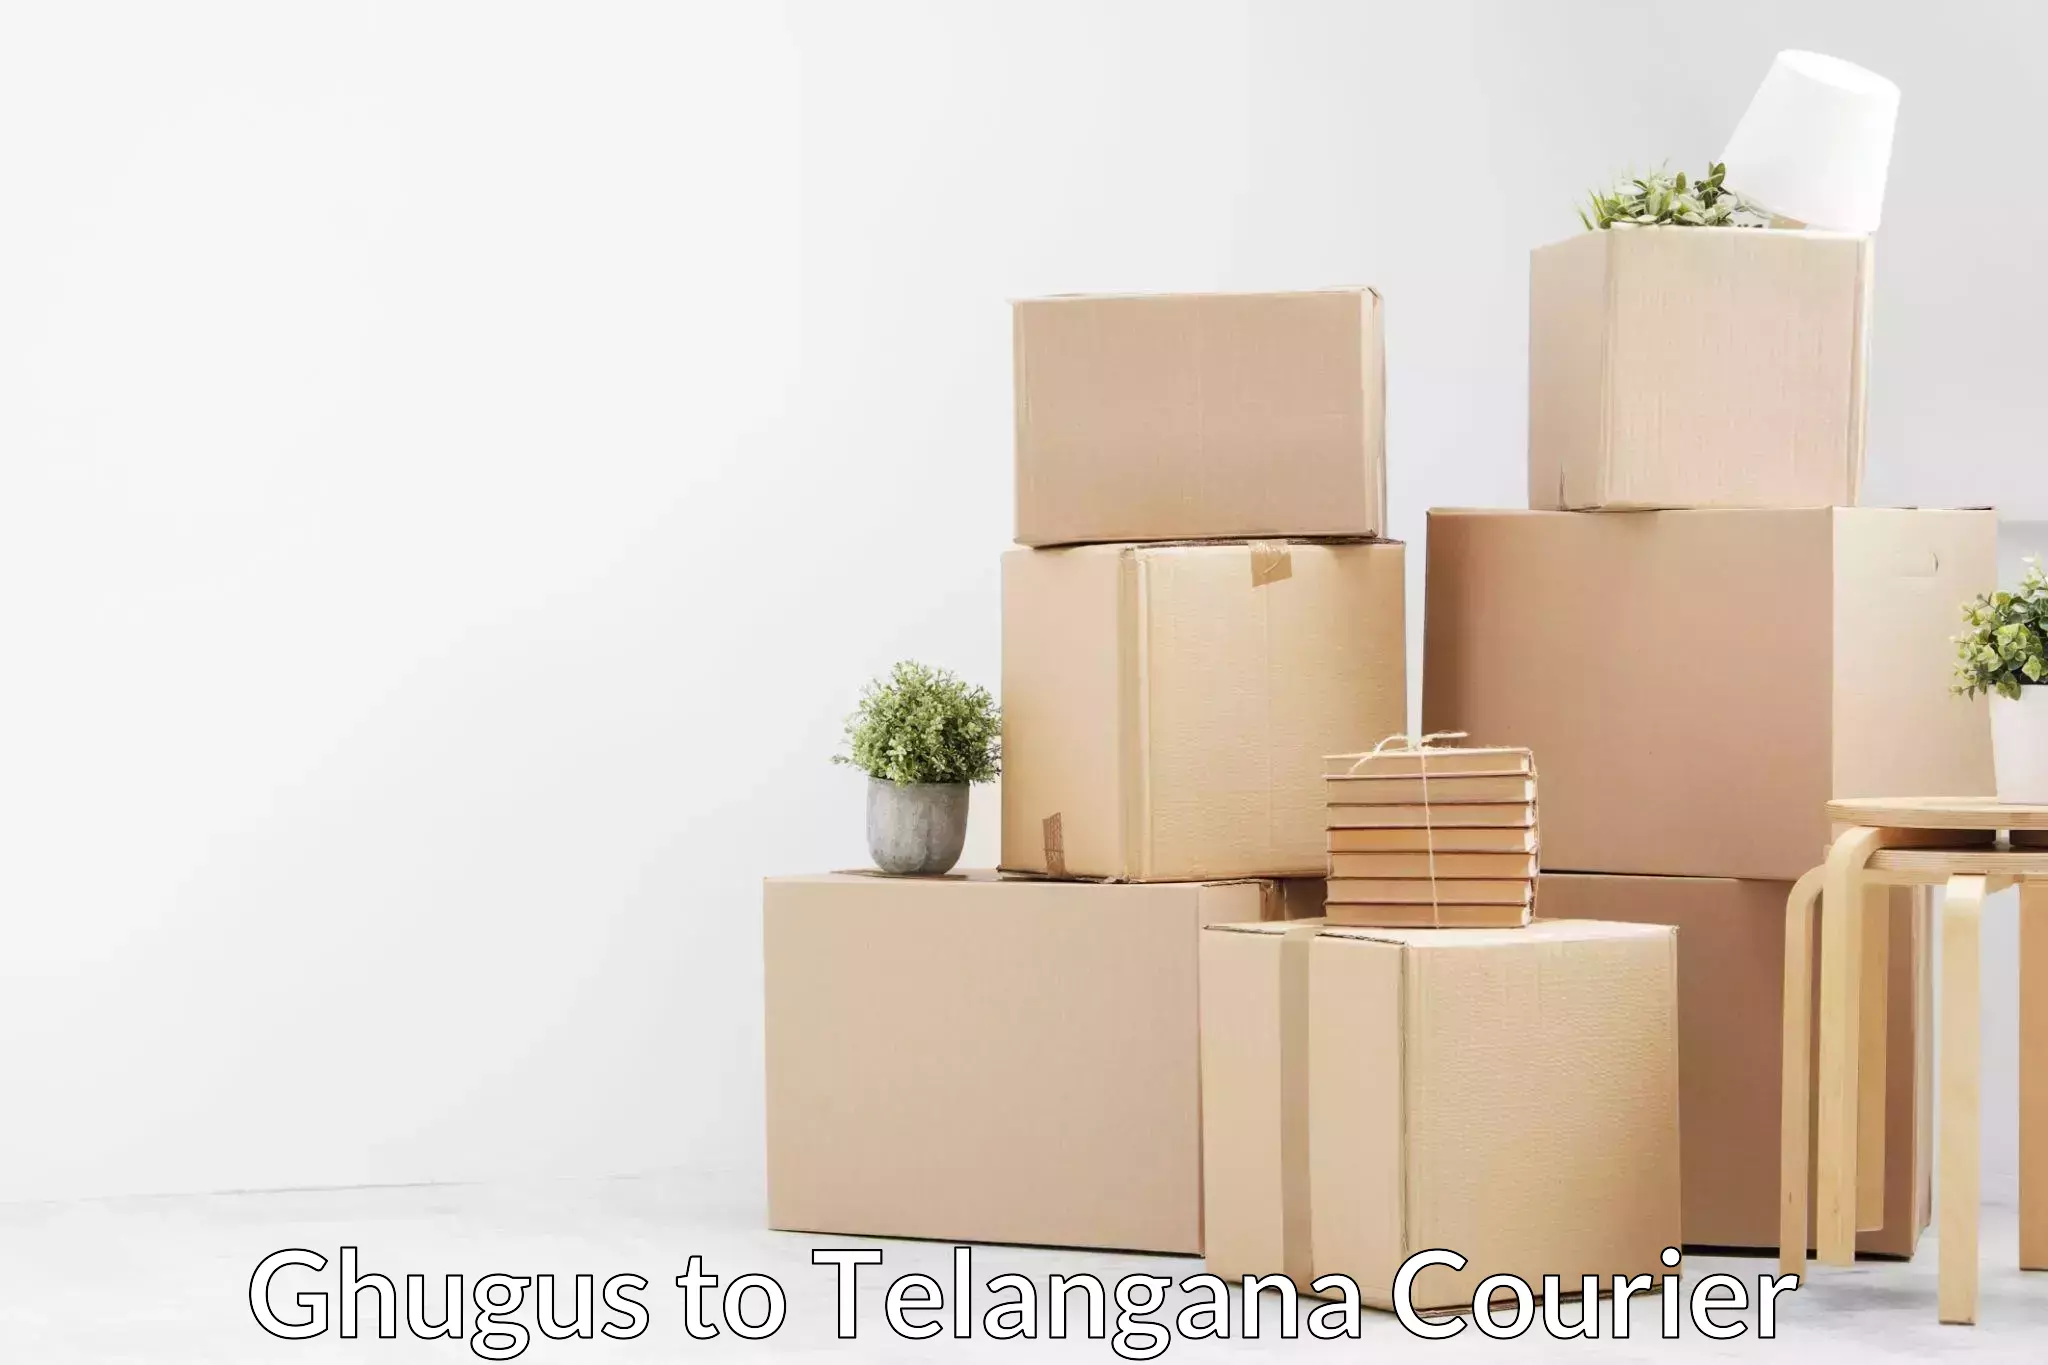 Professional moving company Ghugus to Hyderabad